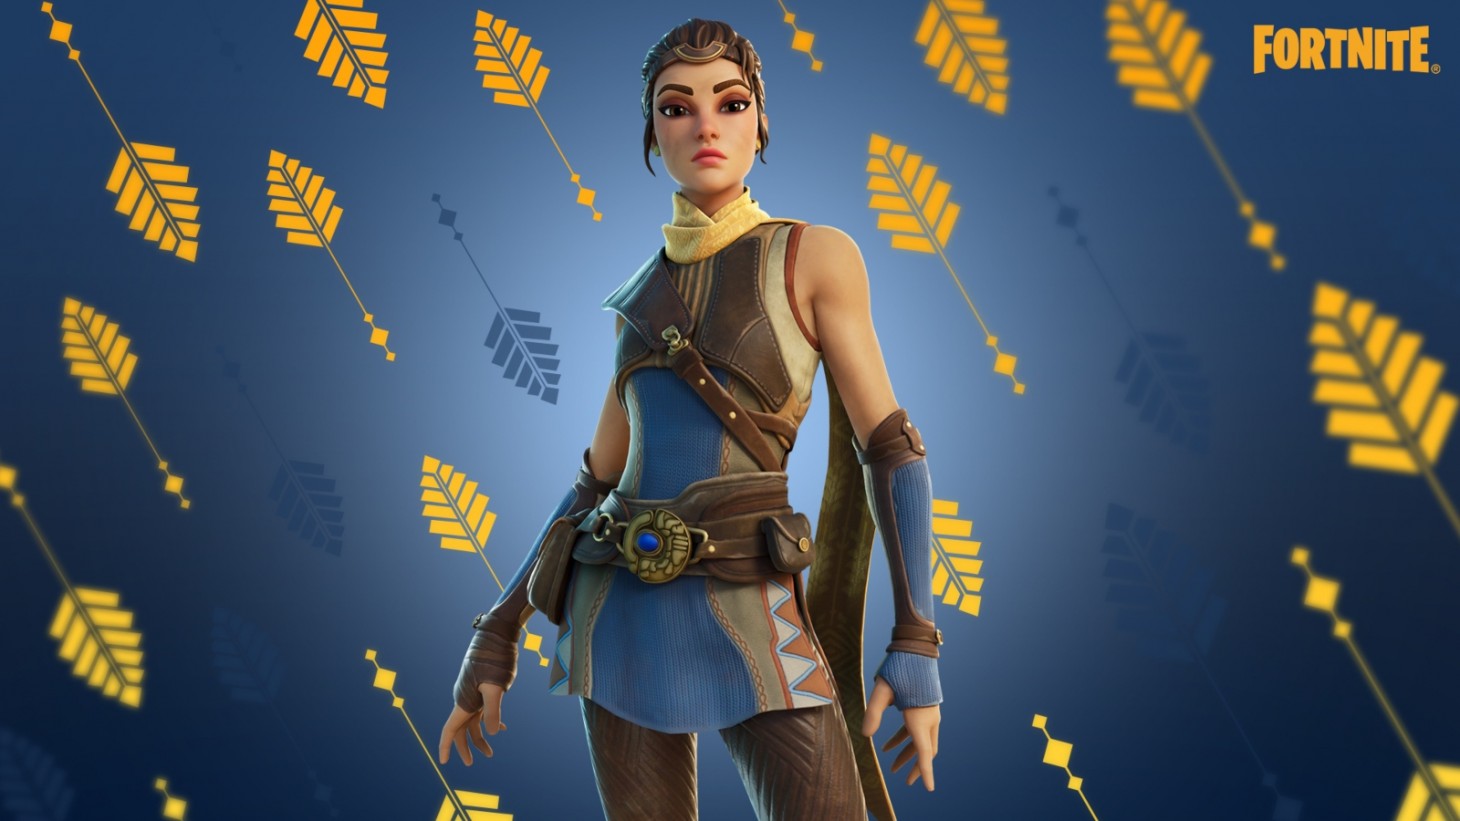 The Unreal Engine 5 Character Is Now A Fortnite Skin - Game Informer